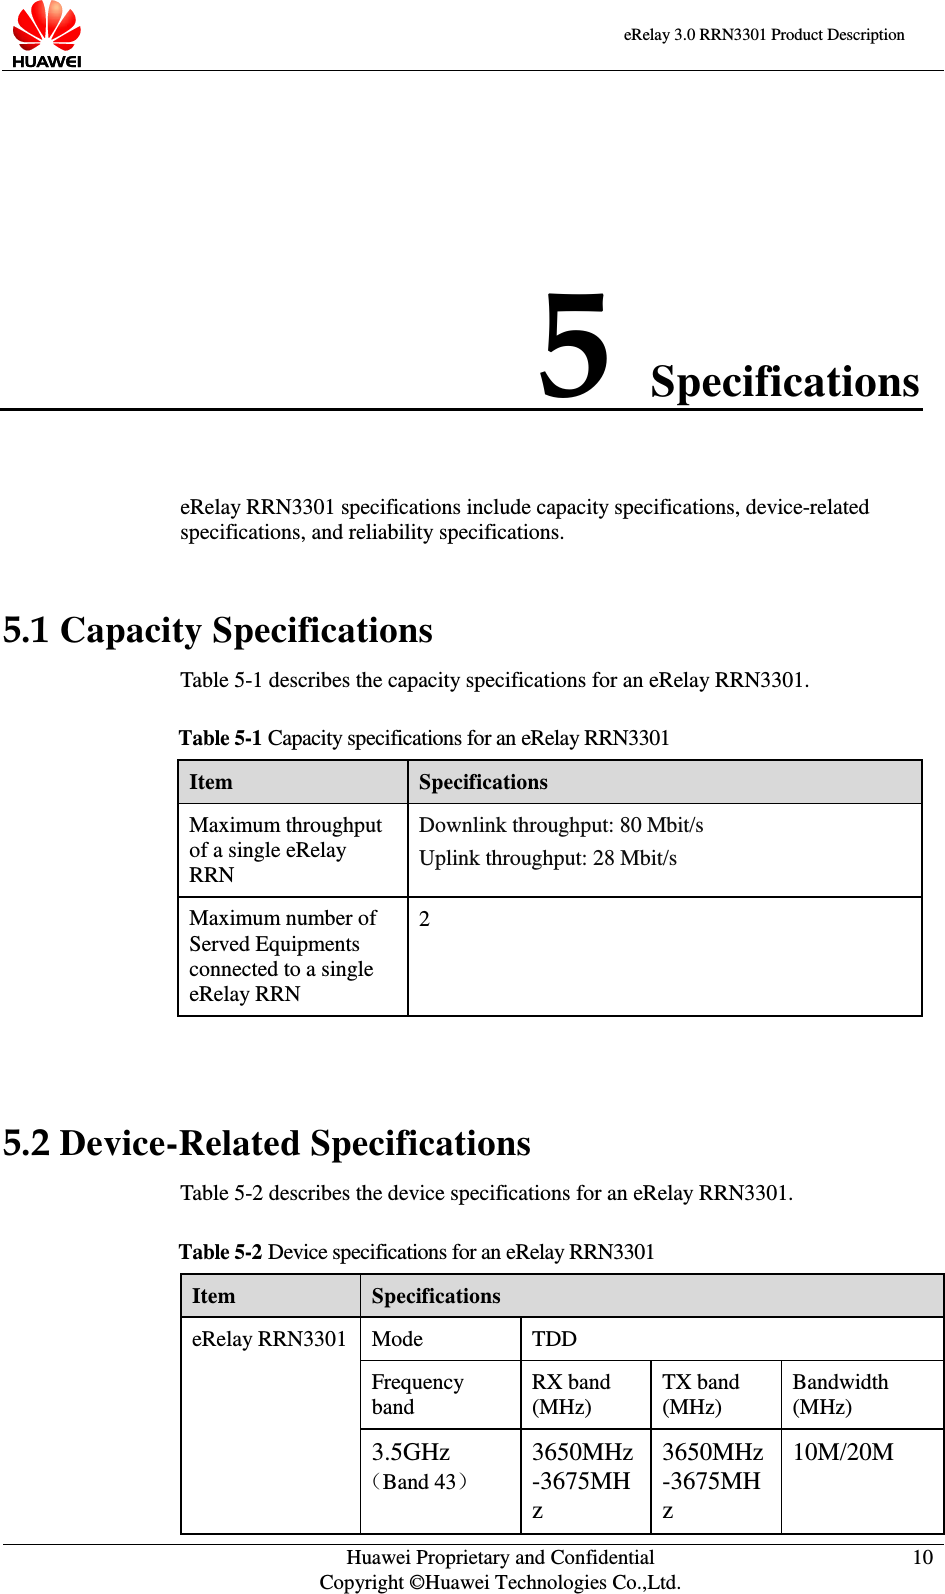    eRelay 3.0 RRN3301 Product Description    Huawei Proprietary and Confidential Copyright ©Huawei Technologies Co.,Ltd. 10  5 Specifications eRelay RRN3301 specifications include capacity specifications, device-related specifications, and reliability specifications.   5.1 Capacity Specifications Table 5-1 describes the capacity specifications for an eRelay RRN3301. Table 5-1 Capacity specifications for an eRelay RRN3301 Item Specifications Maximum throughput of a single eRelay RRN   Downlink throughput: 80 Mbit/s Uplink throughput: 28 Mbit/s Maximum number of Served Equipments connected to a single eRelay RRN 2  5.2 Device-Related Specifications Table 5-2 describes the device specifications for an eRelay RRN3301.   Table 5-2 Device specifications for an eRelay RRN3301 Item Specifications eRelay RRN3301 Mode TDD Frequency band RX band (MHz) TX band (MHz) Bandwidth (MHz) 3.5GHz （Band 43） 3650MHz-3675MHz 3650MHz-3675MHz 10M/20M 